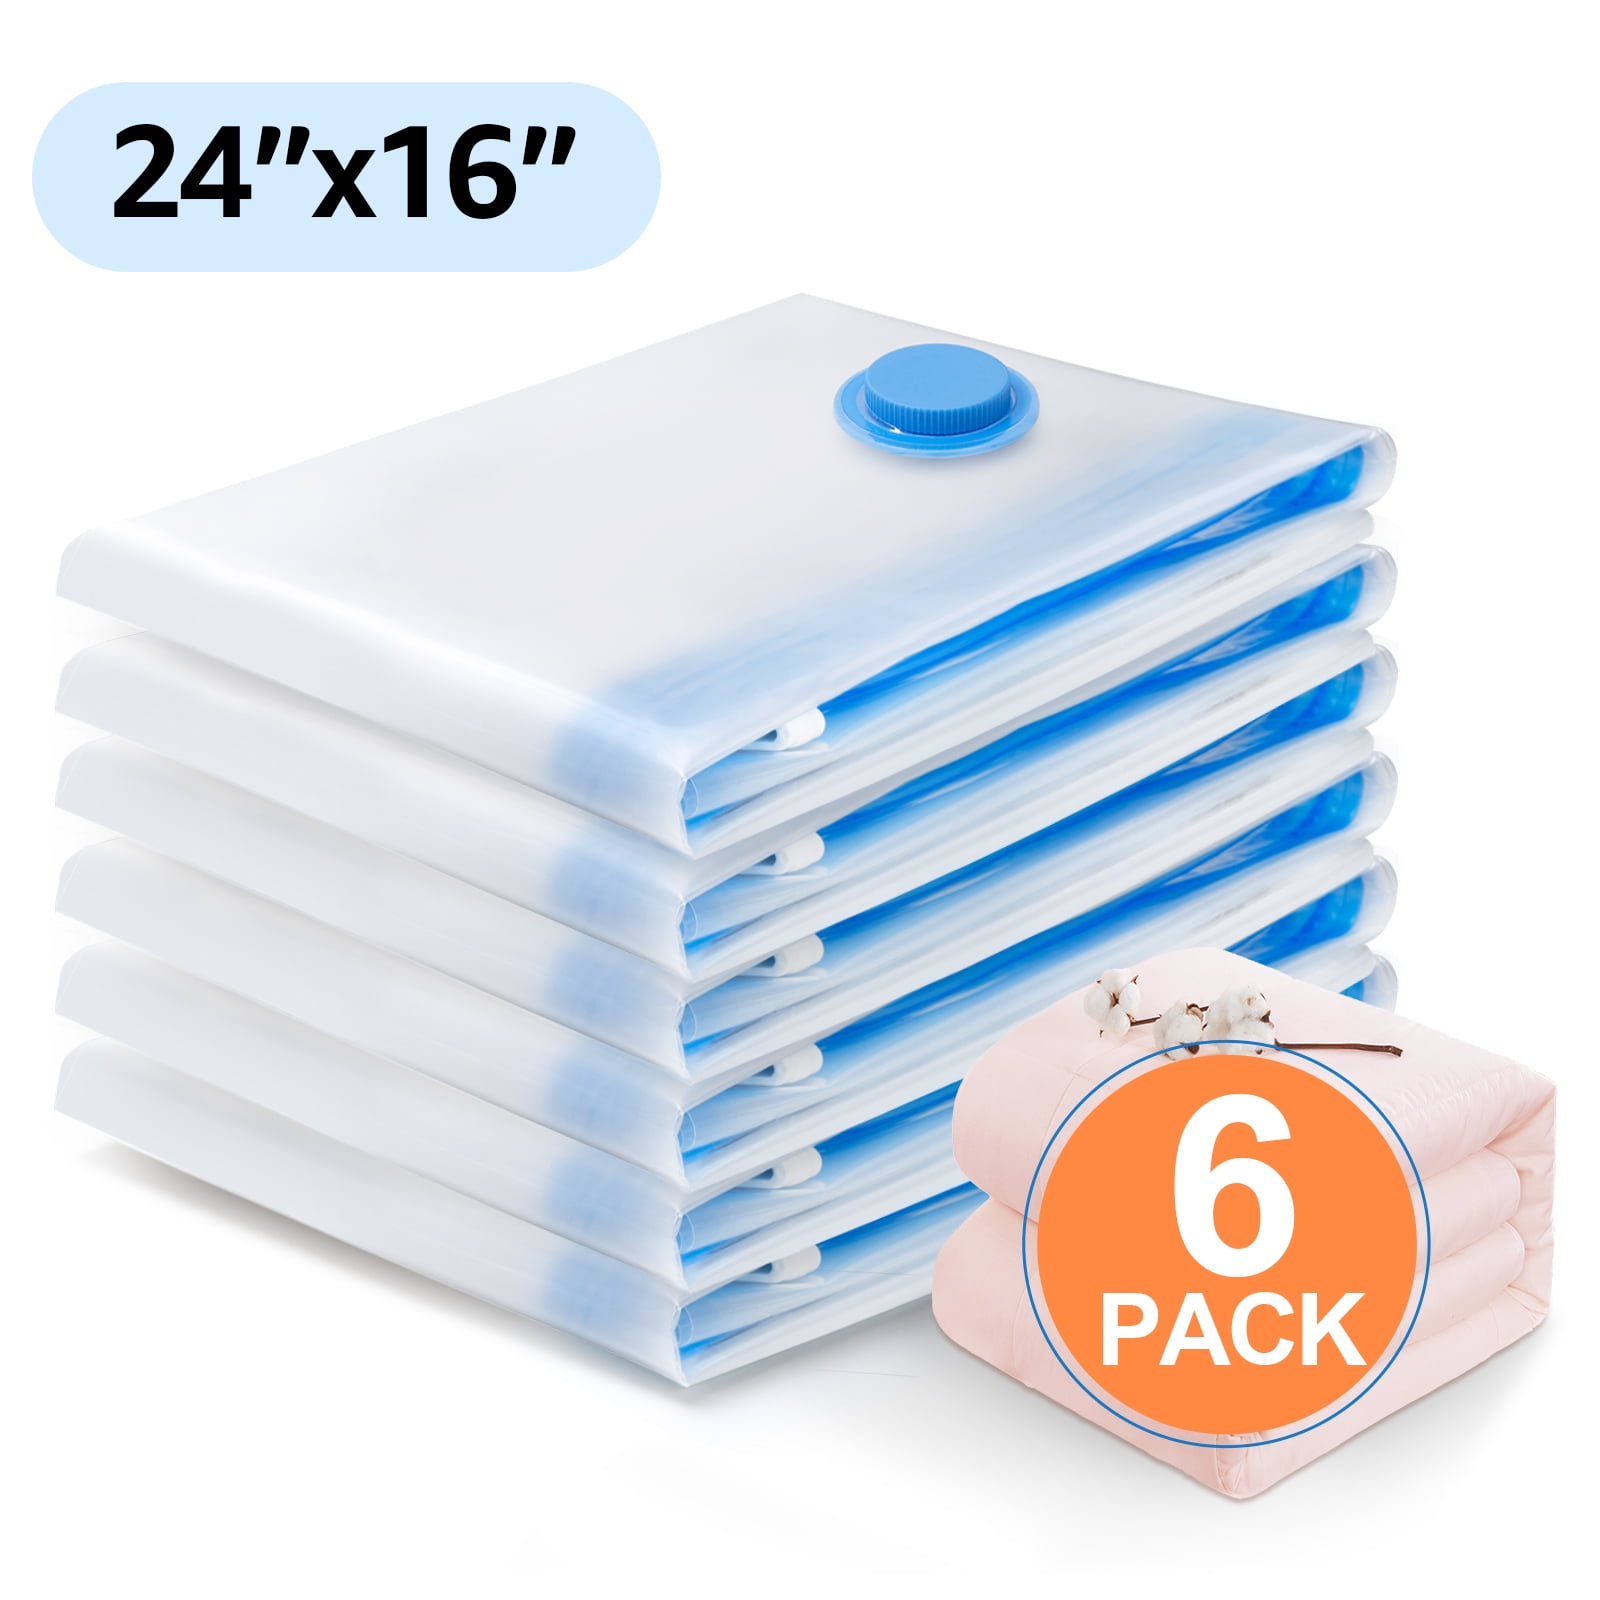 Vacpack Vacuum Storage Bags, 6 Small Space Saver Vacuum Seal Sealer Bags with Travel Pump for Clothes, Clothing (6s)